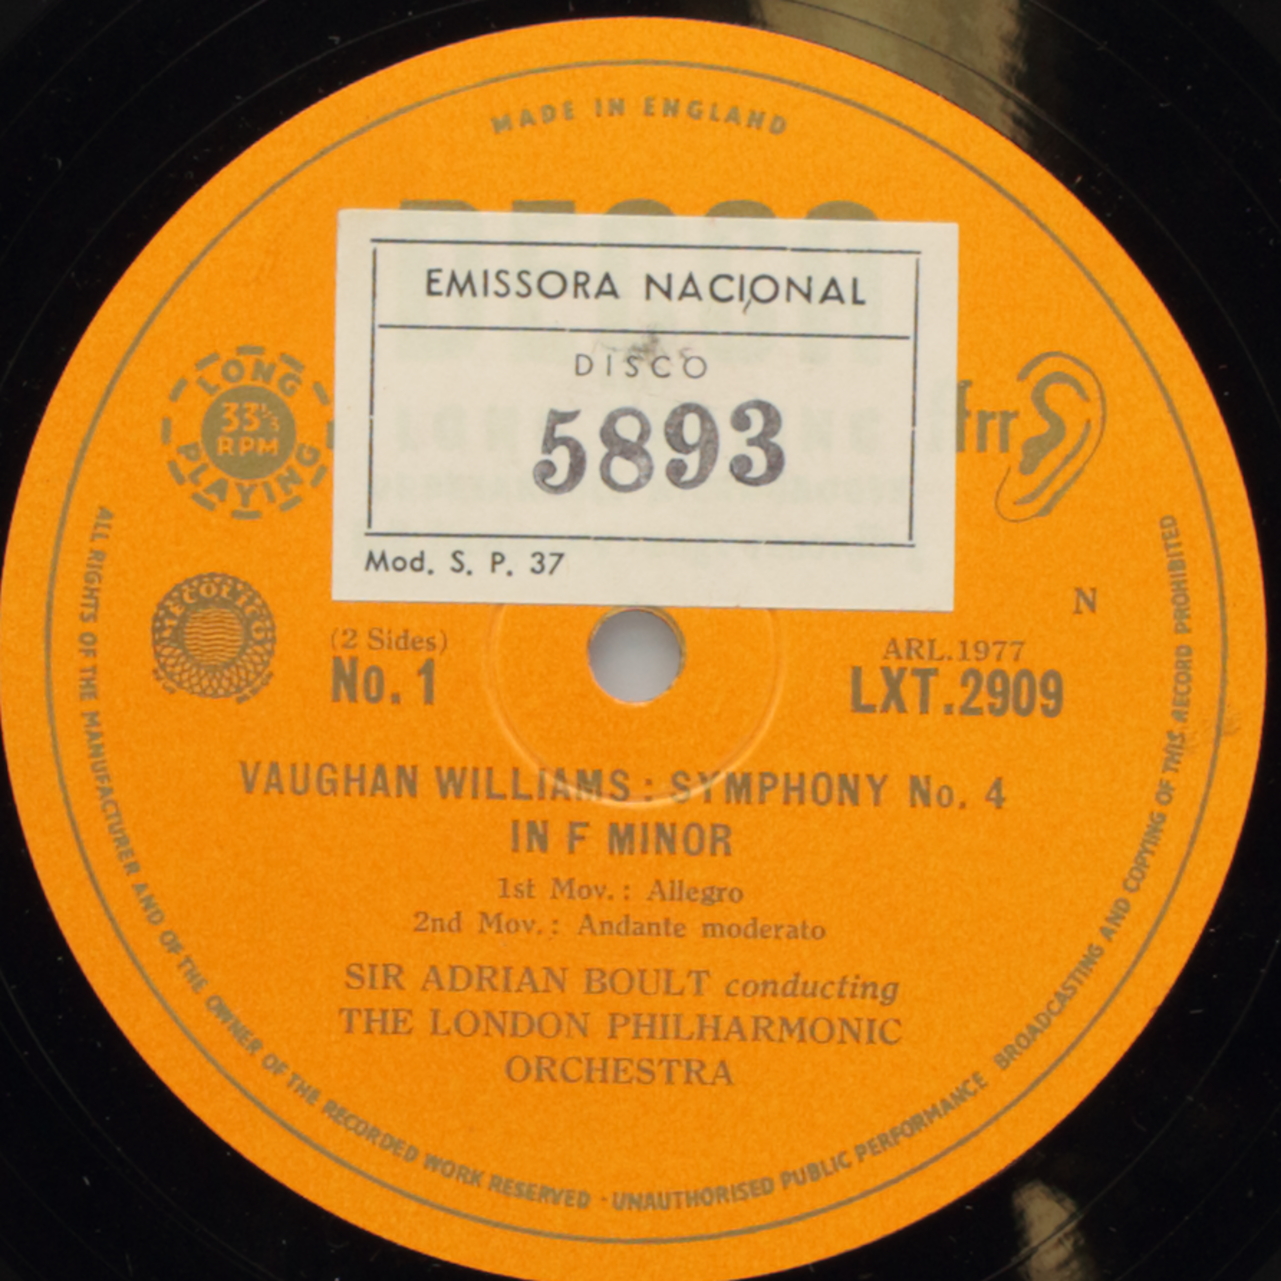 Vaughan Williams: Symphony No. 4 in F minor